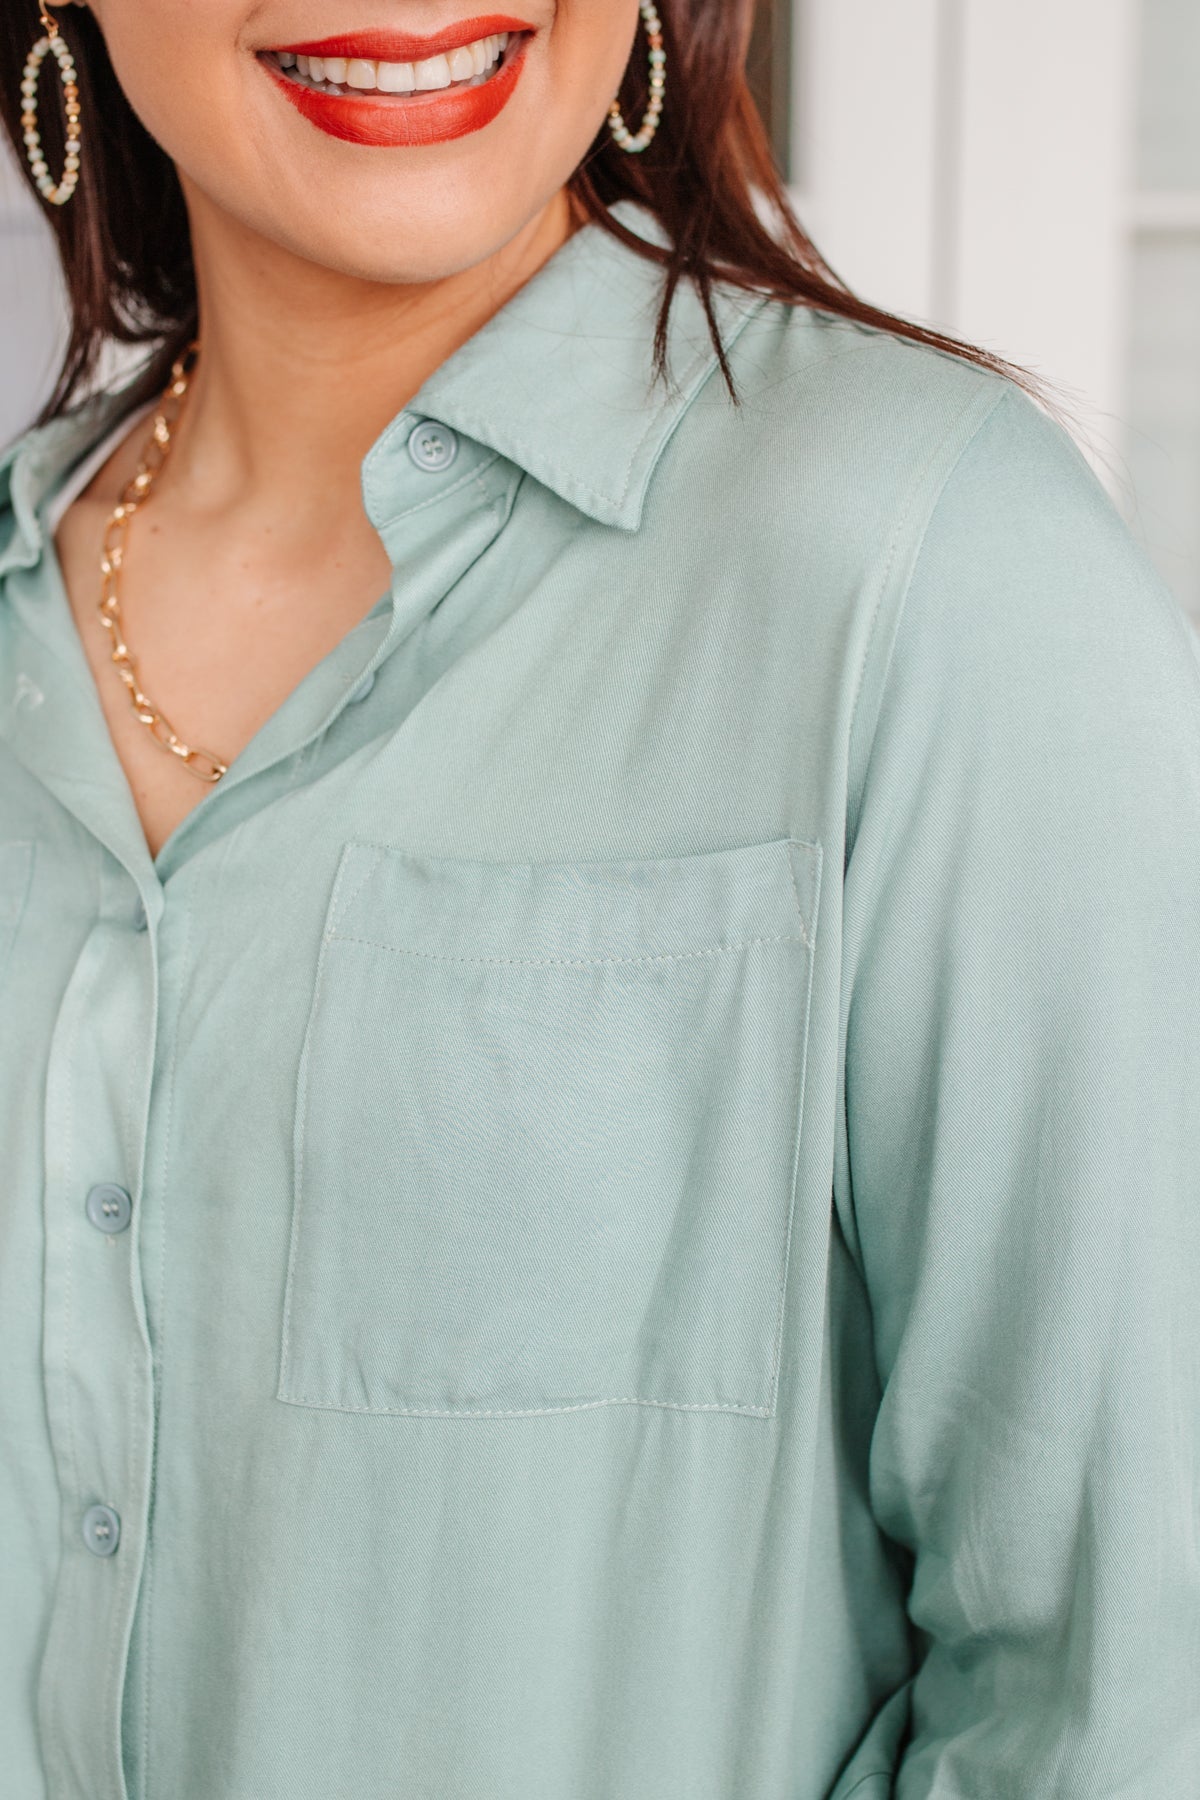 Unwavering Confidence Blouse in Light Blue Womens Southern Soul Collectives 